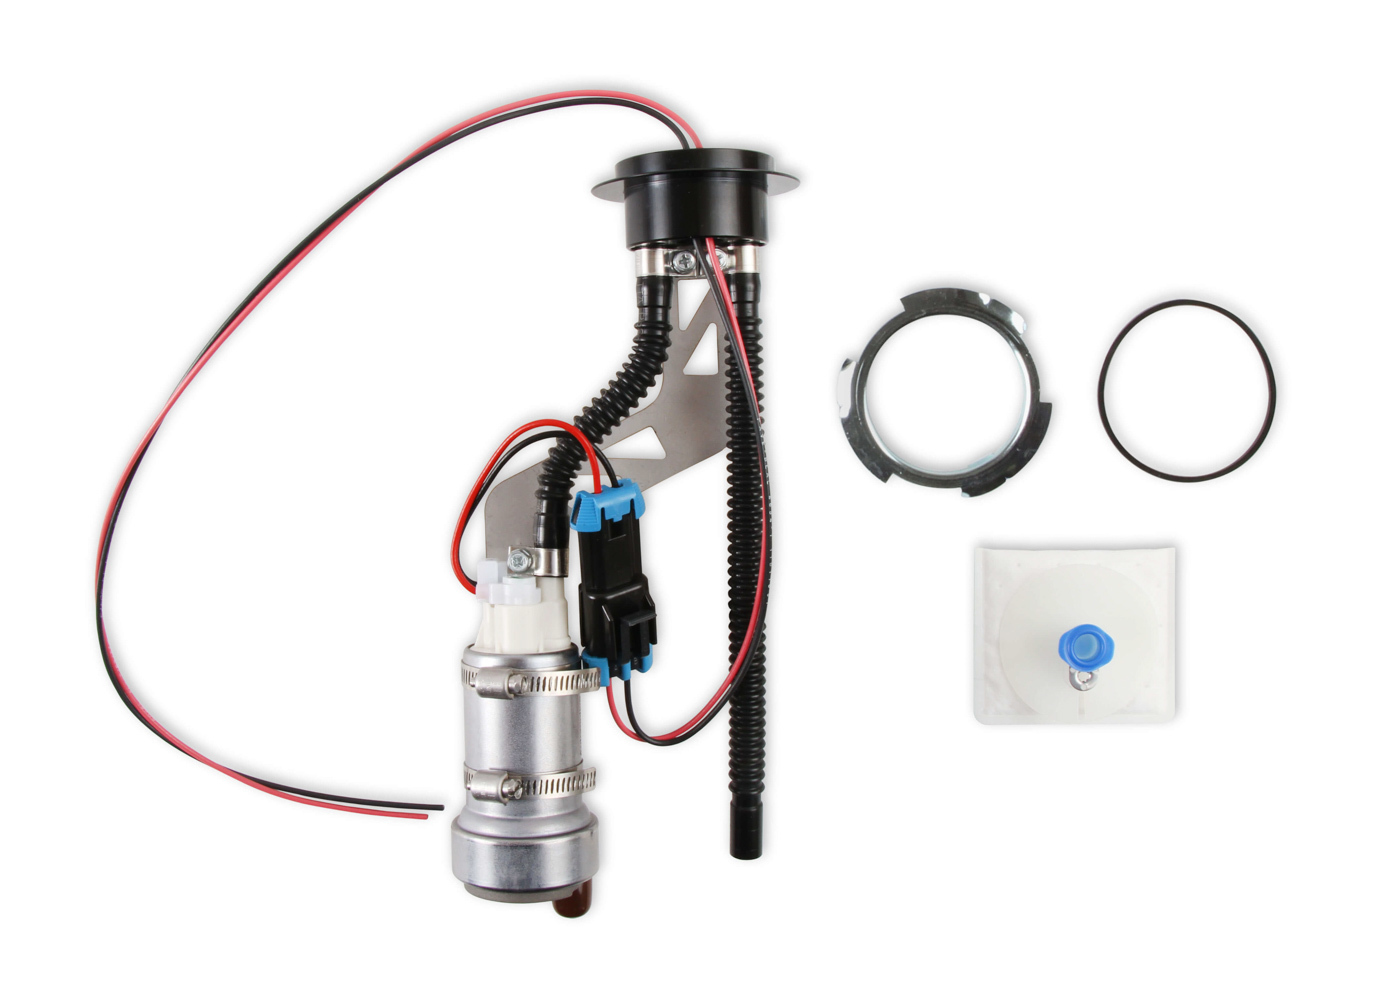 Holley 12-347 Fuel Pump, Sniper, Electric, 525 lph, Install Kit, Gas, Ford Mustang 1983-97, Kit